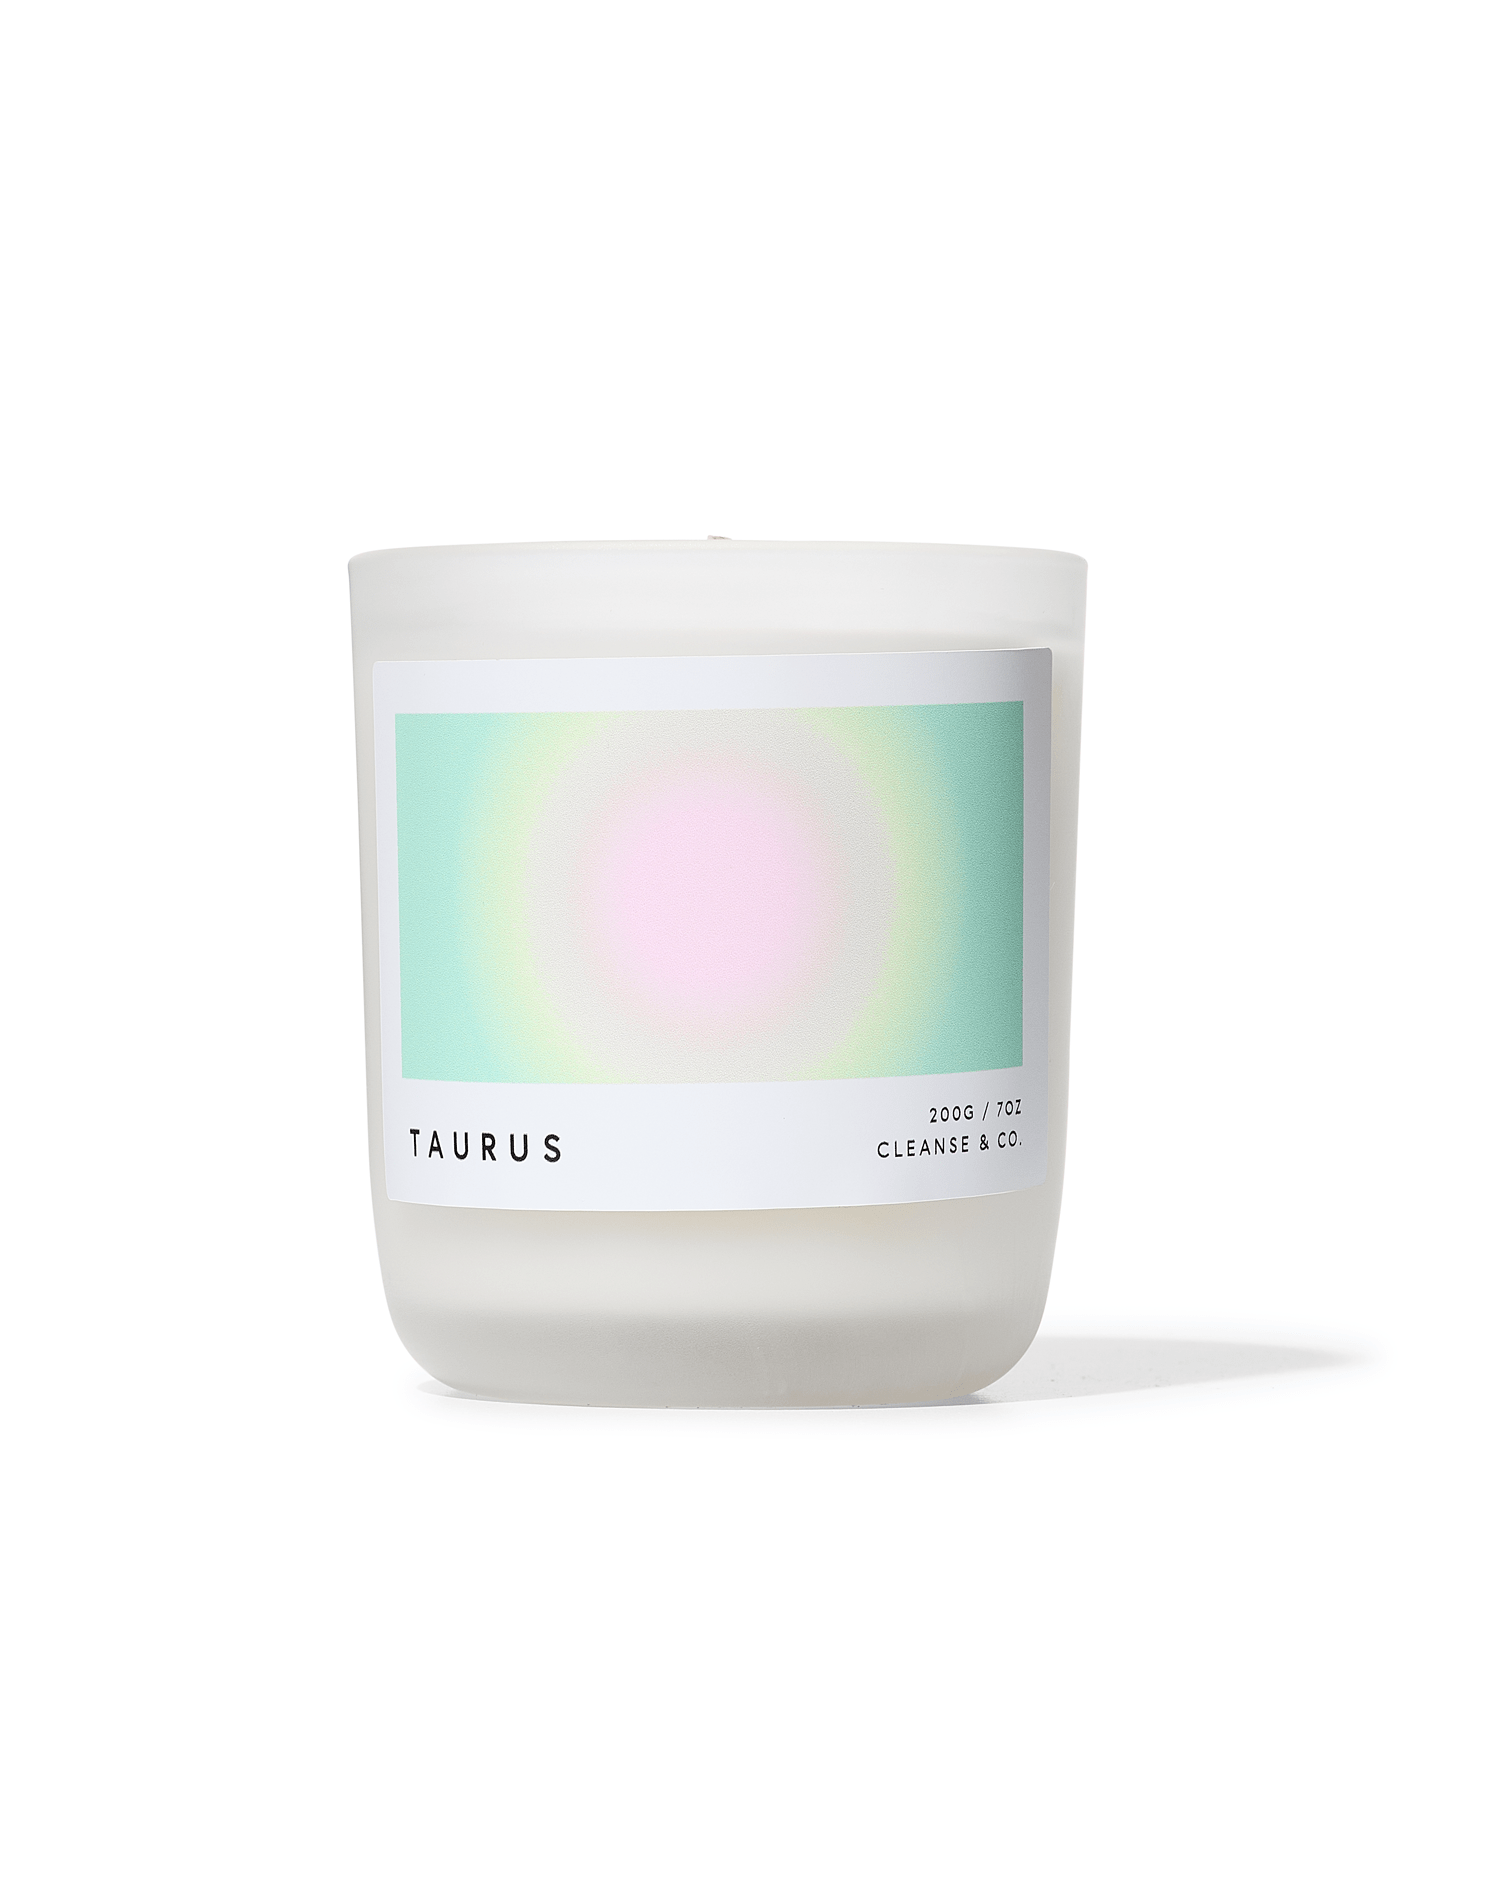 Taurus - Aura Candle: 200G / Grapefruit & White Orchid by Cleanse & Co.